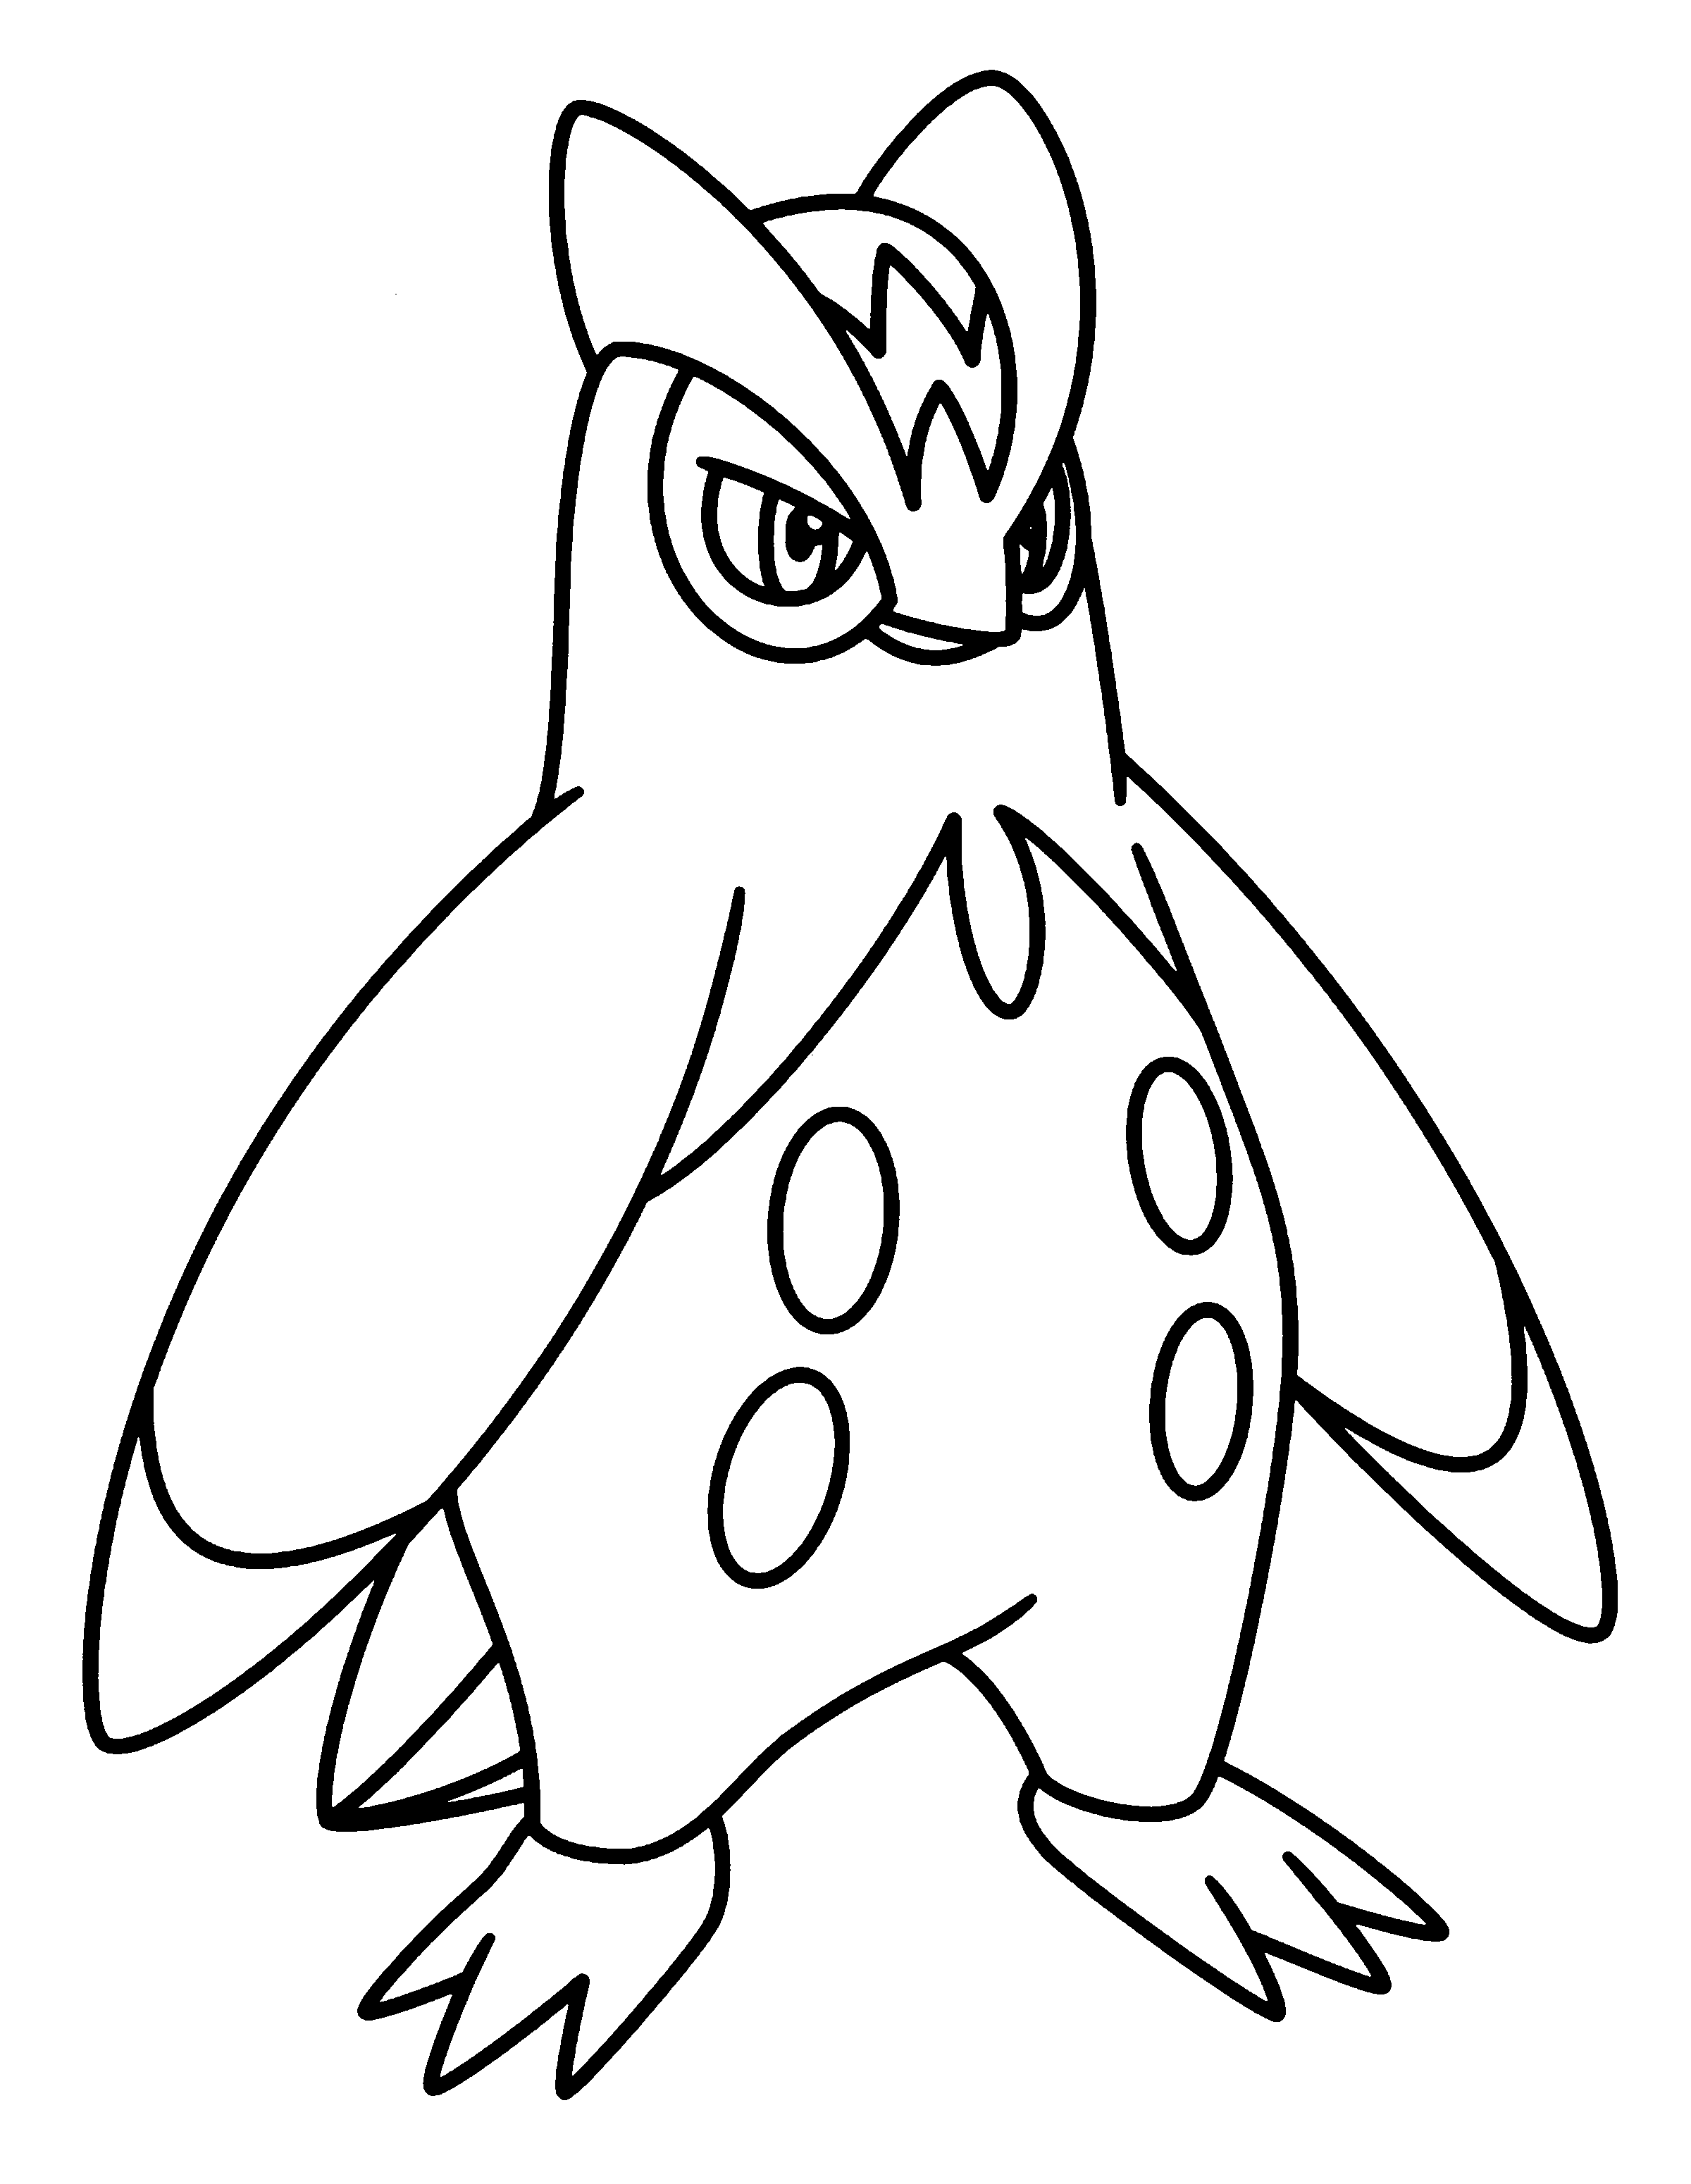 coloring pages pokemon piplup - photo #24